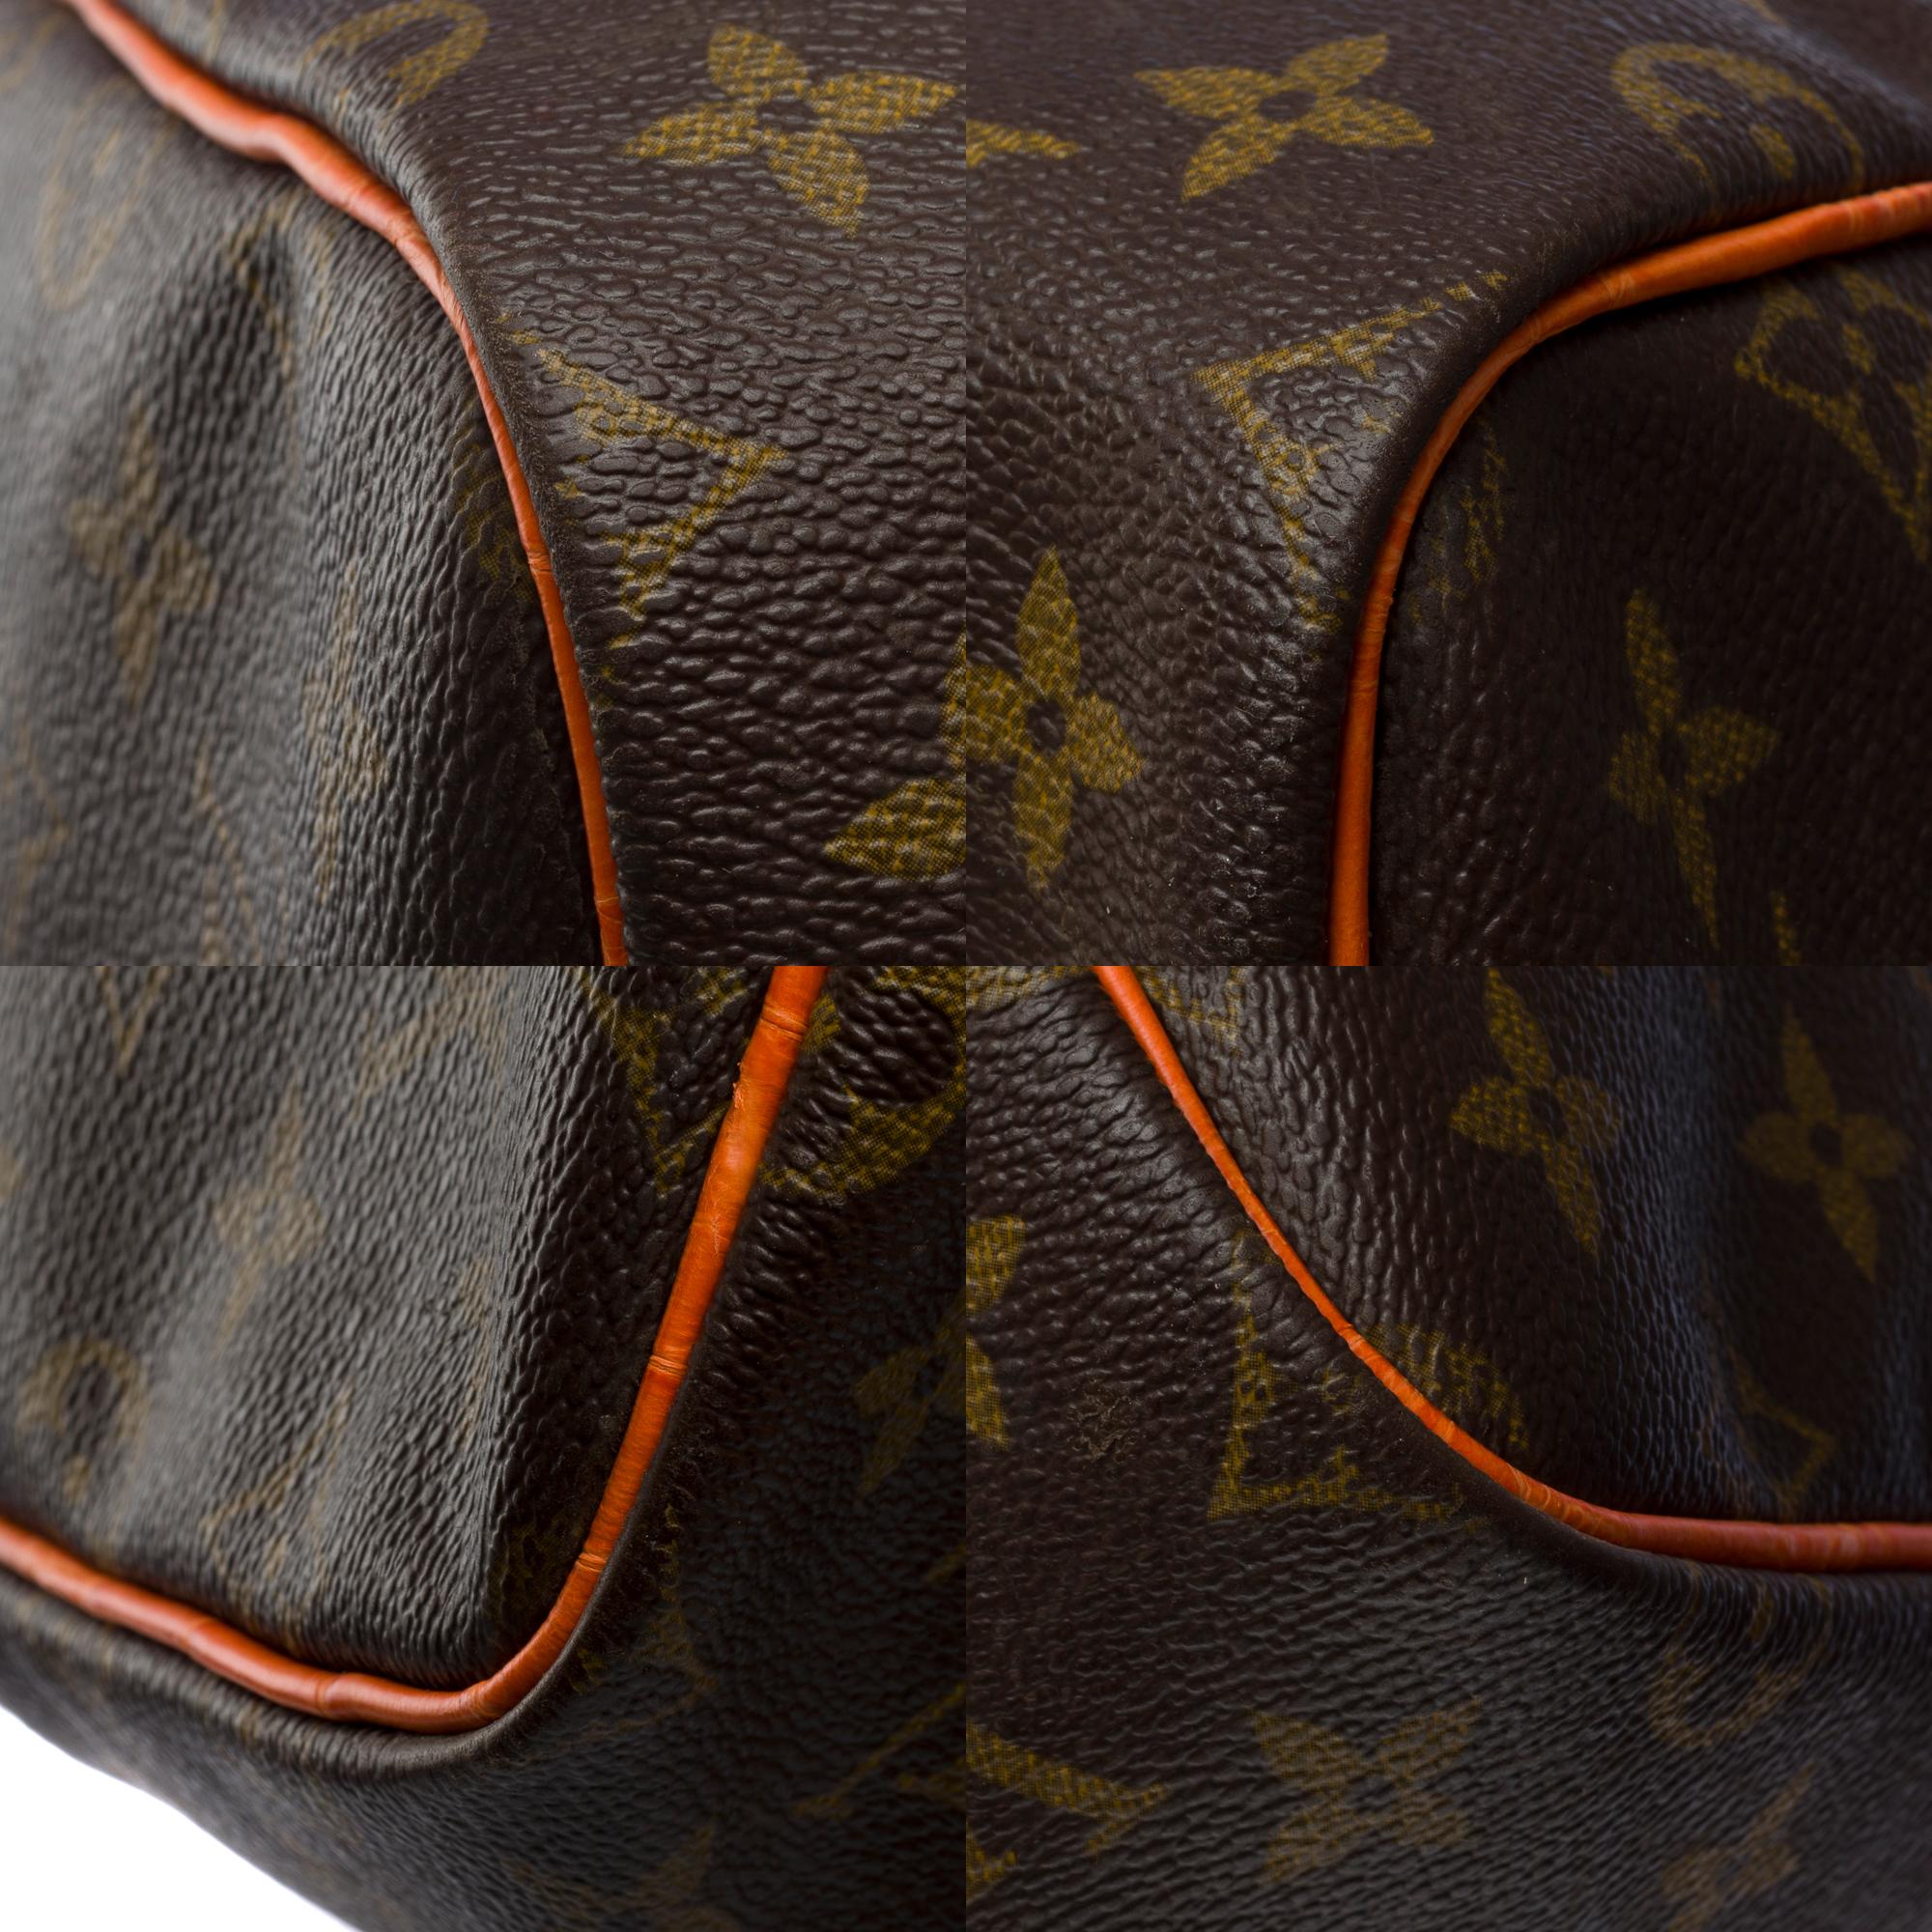 Customized Louis Vuitton Keepall 55 strap Travel bag with Orange Crocodile For Sale 5